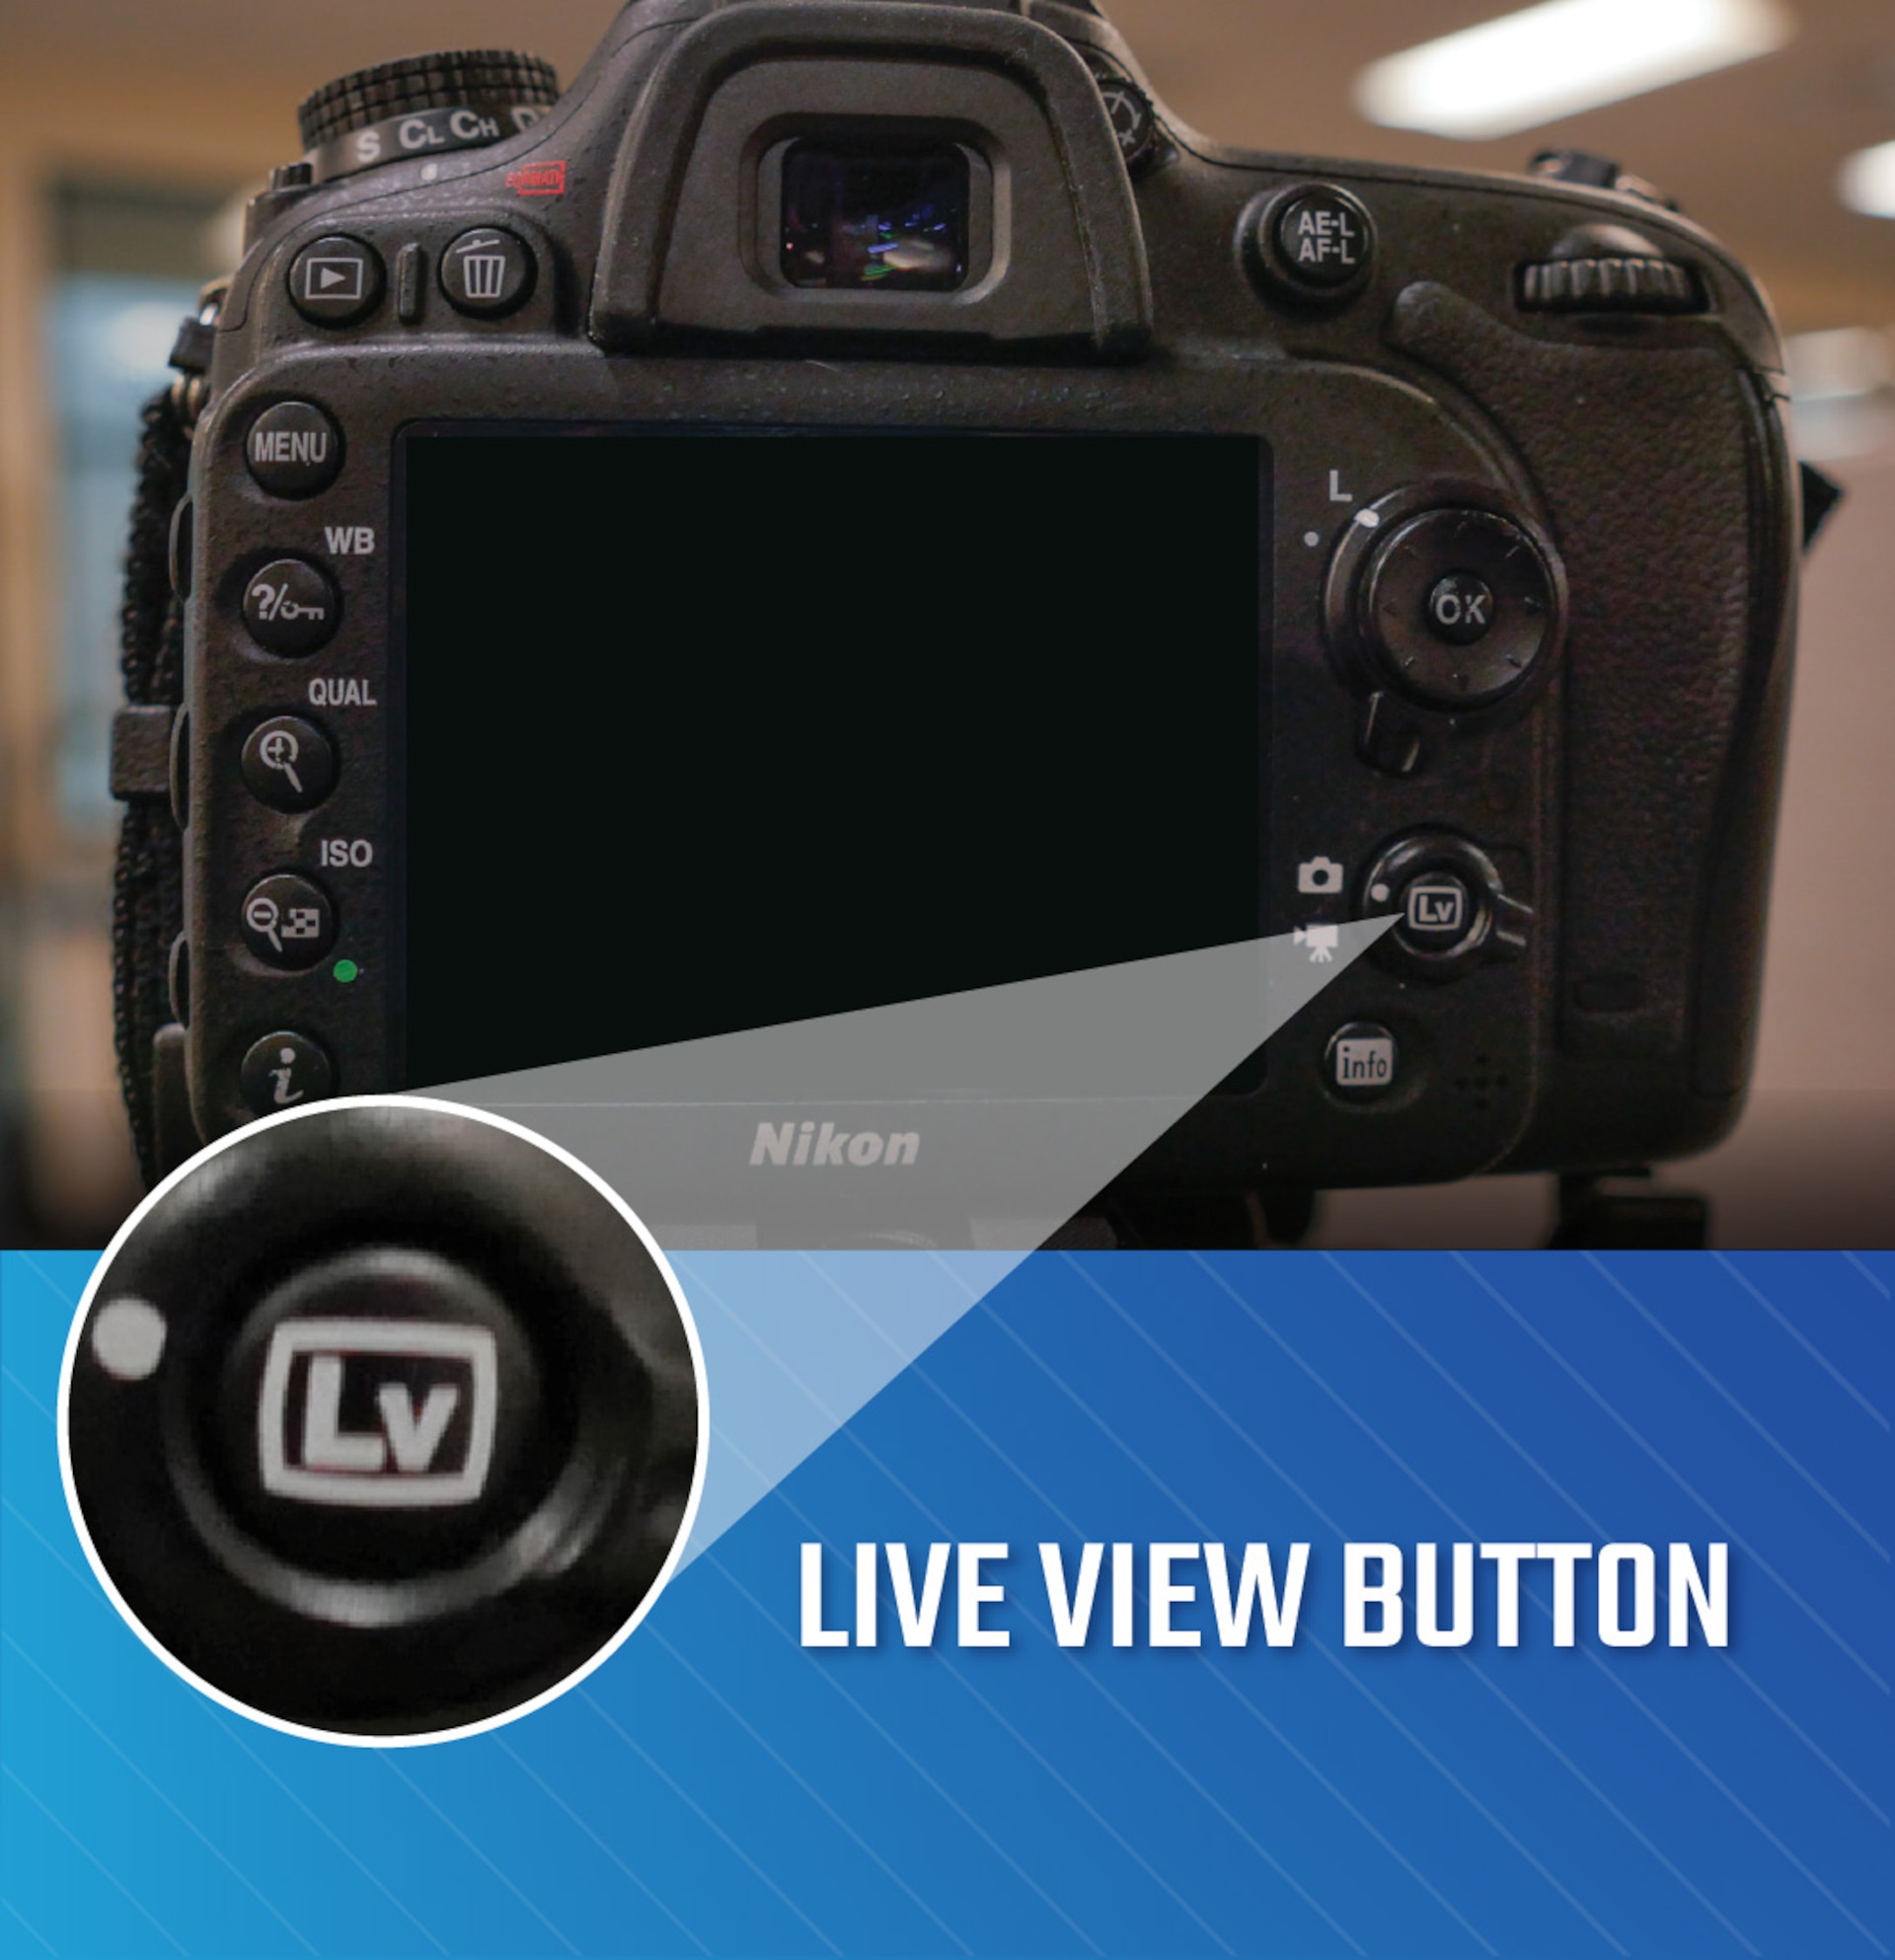 Camera with point to Lv button